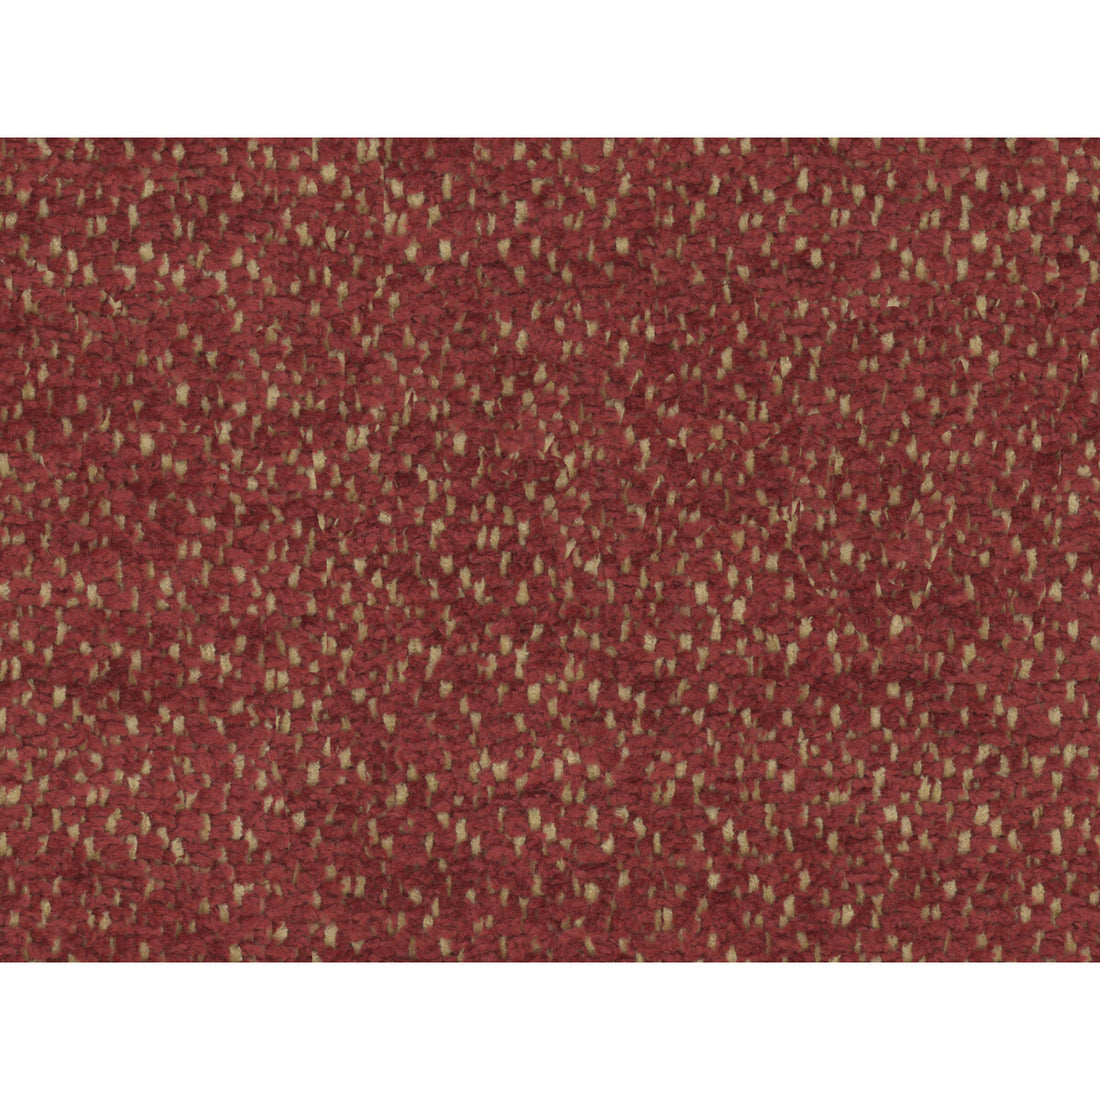 Bourget Chenille fabric in ruby color - pattern 8016108.19.0 - by Brunschwig &amp; Fils in the Chambery Textures collection